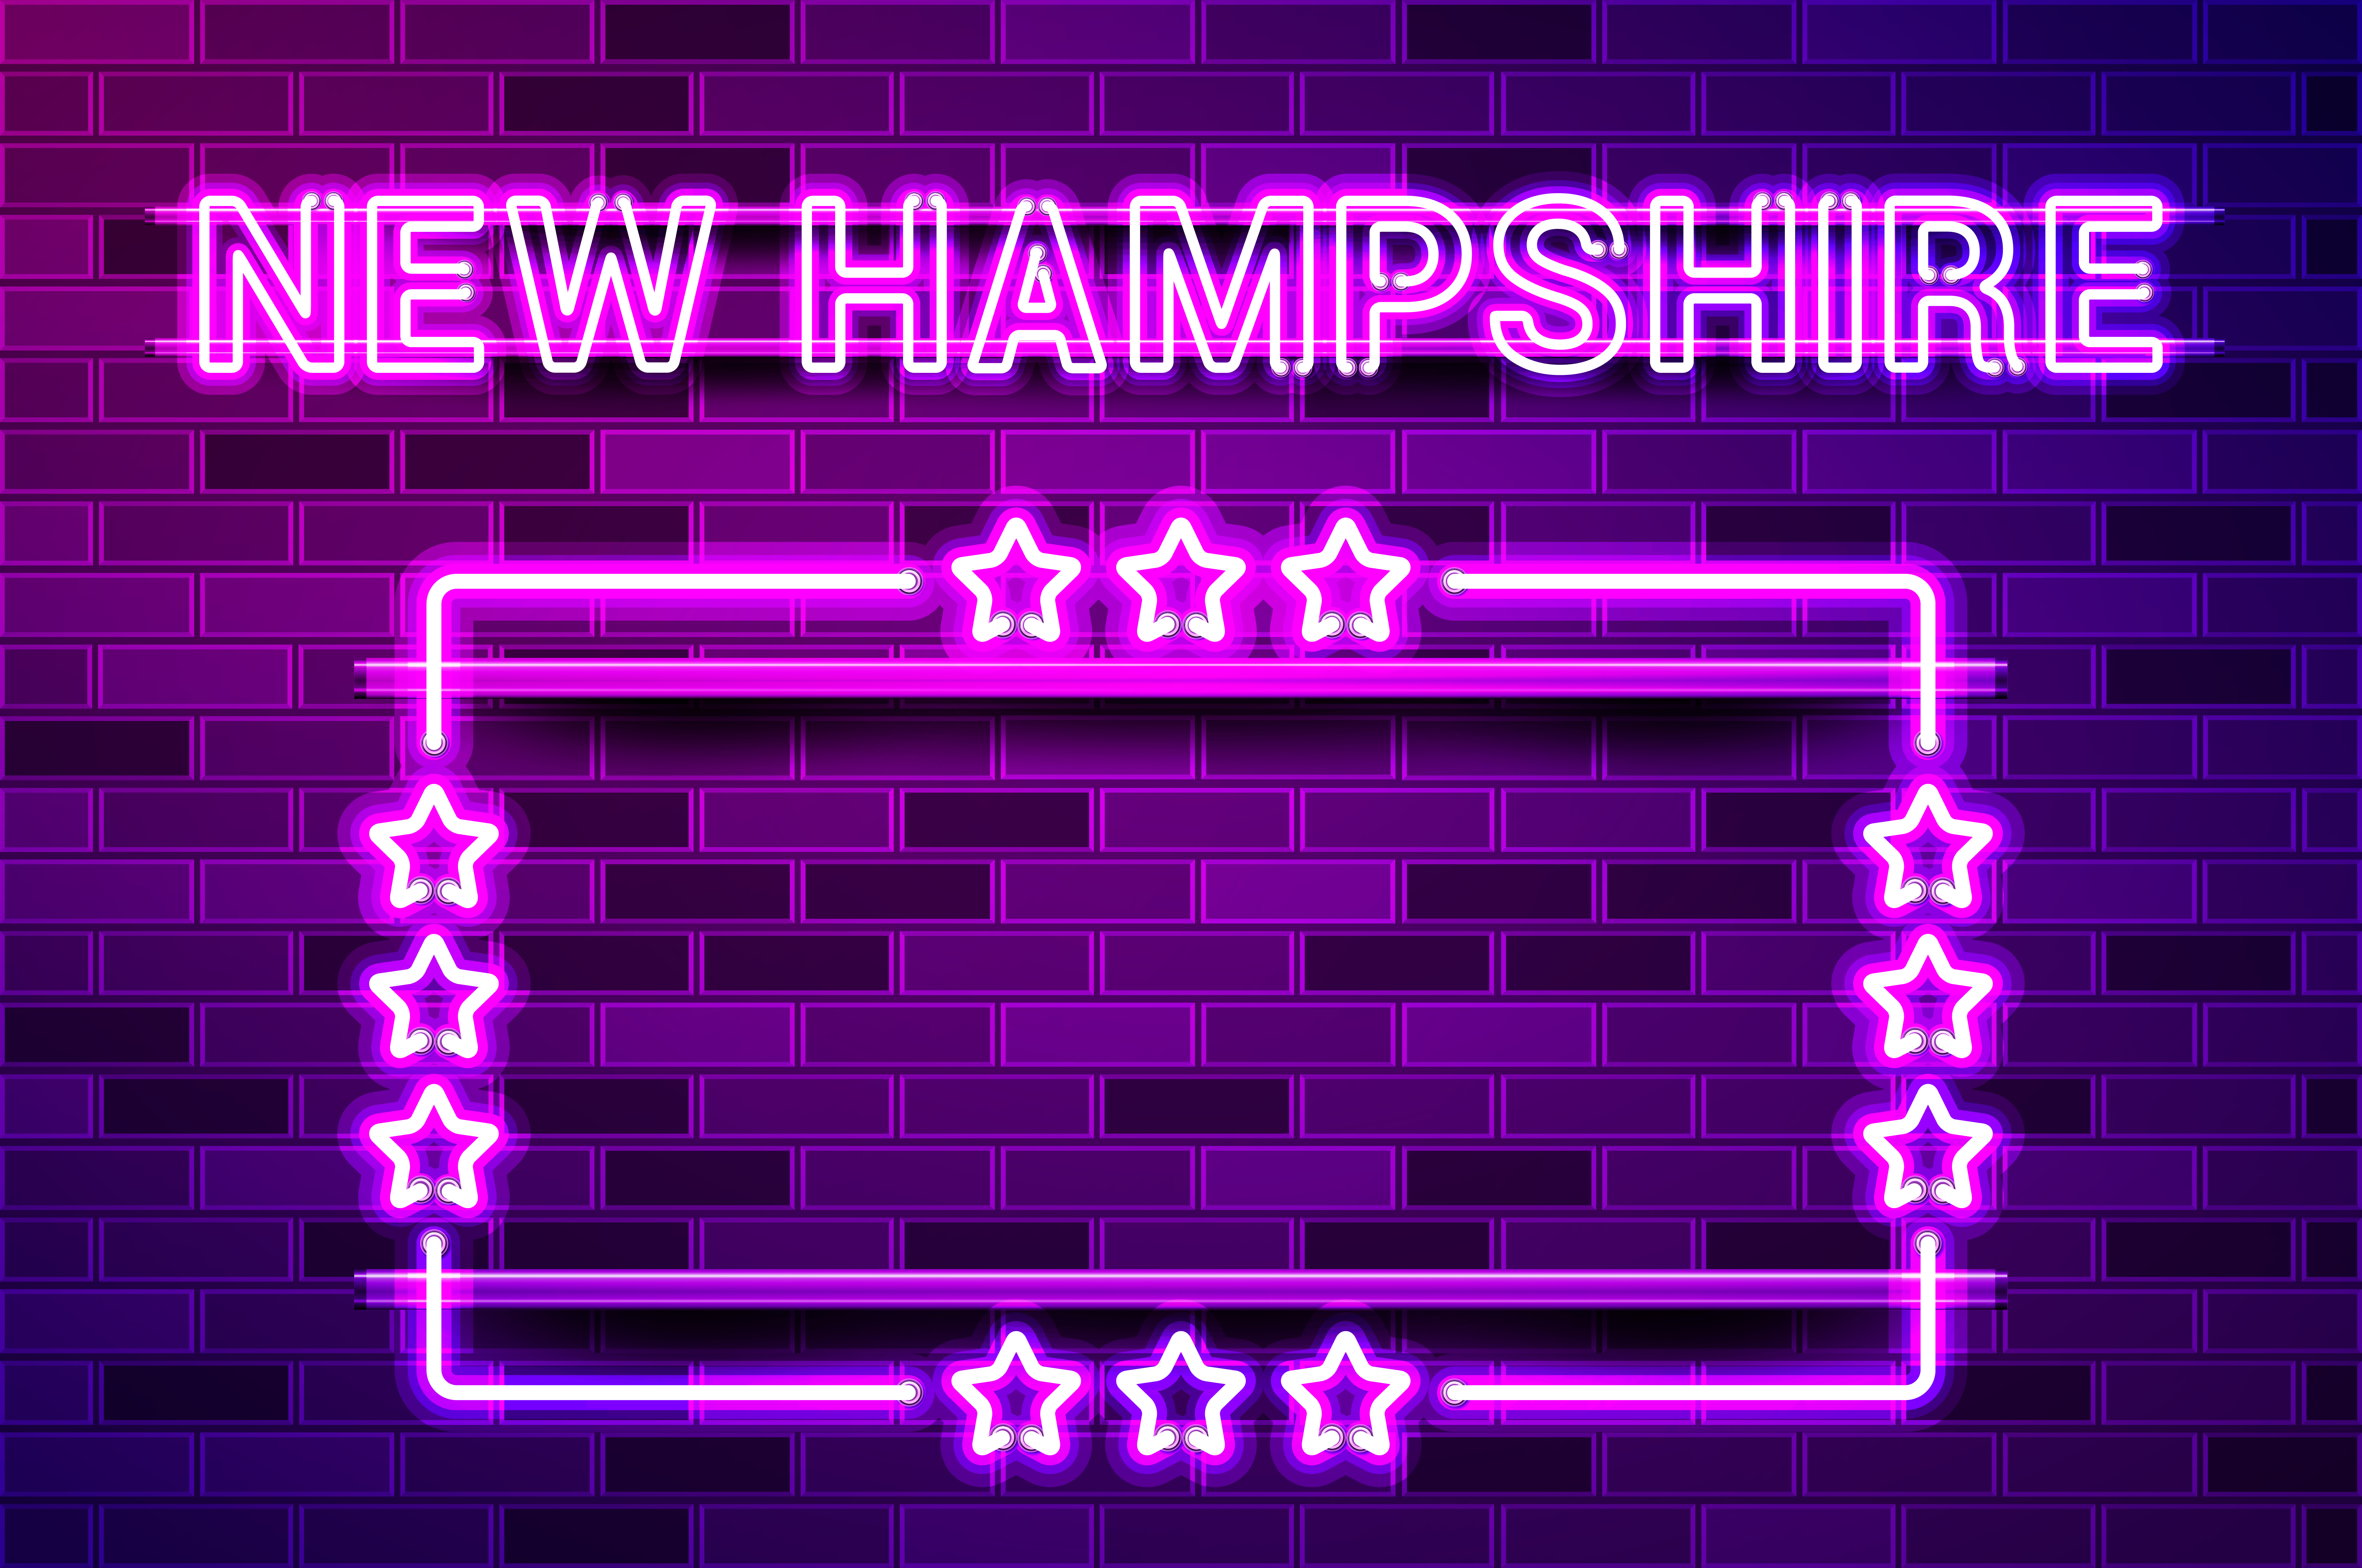 New Hampshire US State glowing purple neon lettering and a rectangular frame with stars. Realistic vector illustration. Purple brick wall, violet glow, metal holders.. New Hampshire US State glowing purple neon lettering and a rectangular frame with stars